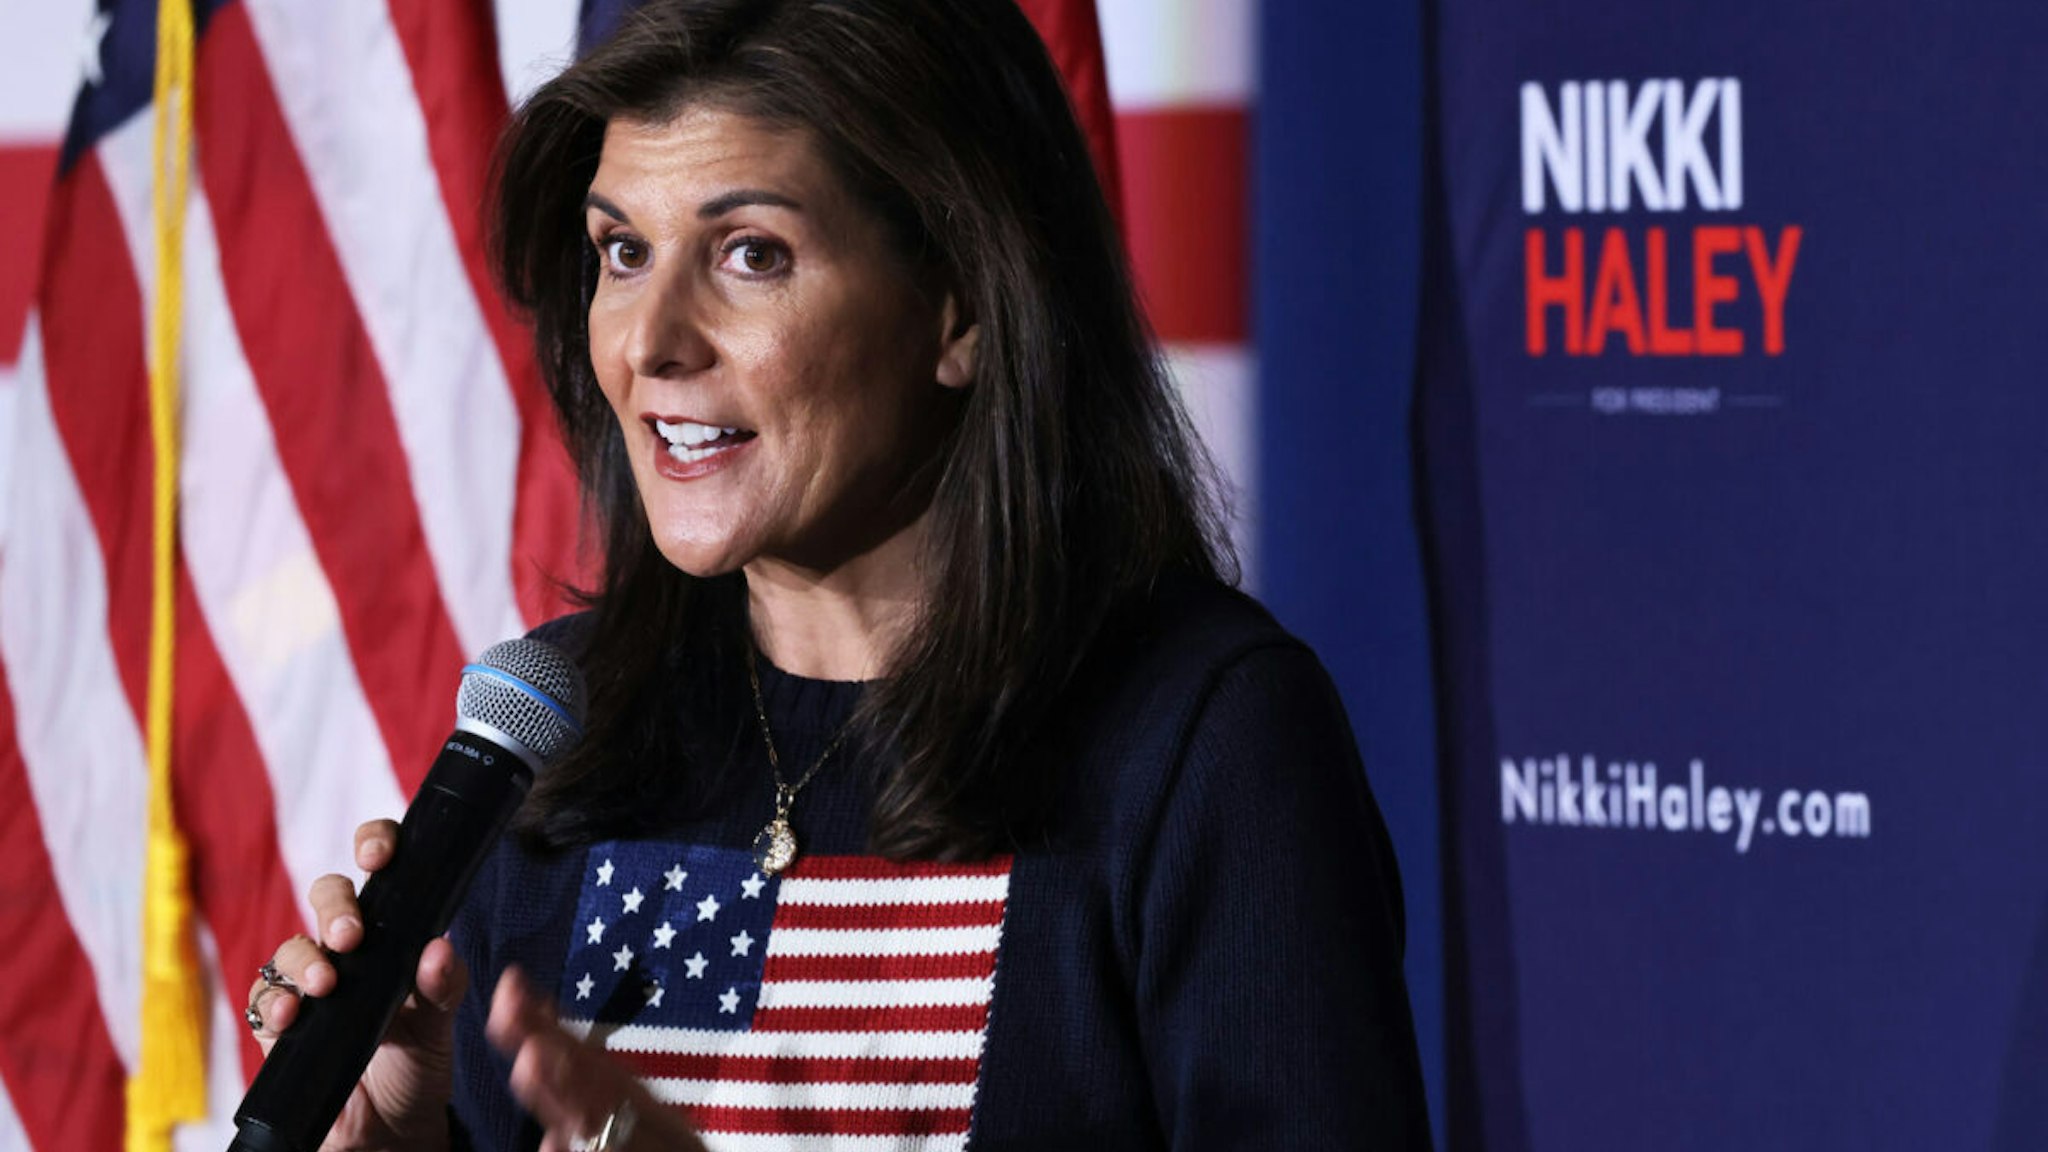 ROCHESTER, NEW HAMPSHIRE - OCTOBER 12: Republican presidential candidate former U.N. Ambassador Nikki Haley speaks during a town hall at Rochester American Legion Post #7 on October 12, 2023 in Rochester, New Hampshire. Haley is holding several campaign events in New Hampshire ahead of her filing the New Hampshire Primary Ballot and appearing with other Republican presidential candidates at the New Hampshire Republican Party’s First in the Nation Summit.